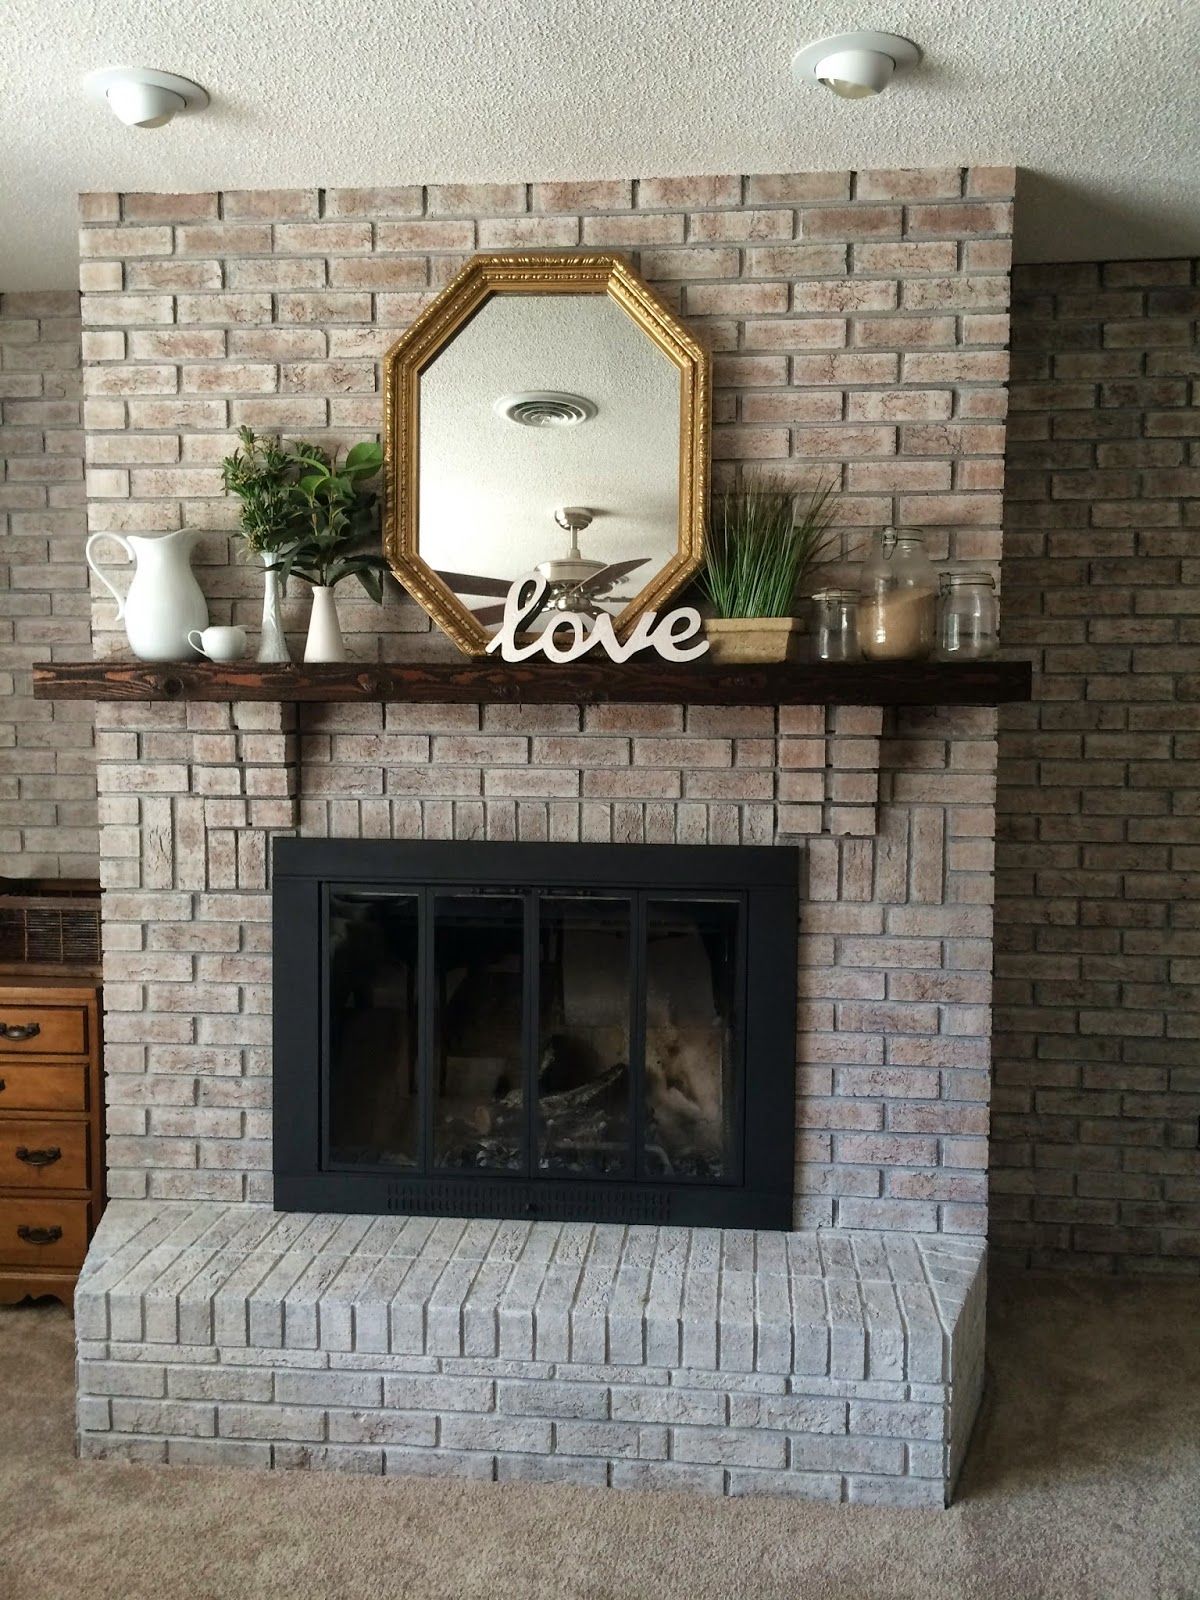 Refacing Brick Fireplace Best Of White Washing Brick with Gray Beige Walking with Dancers